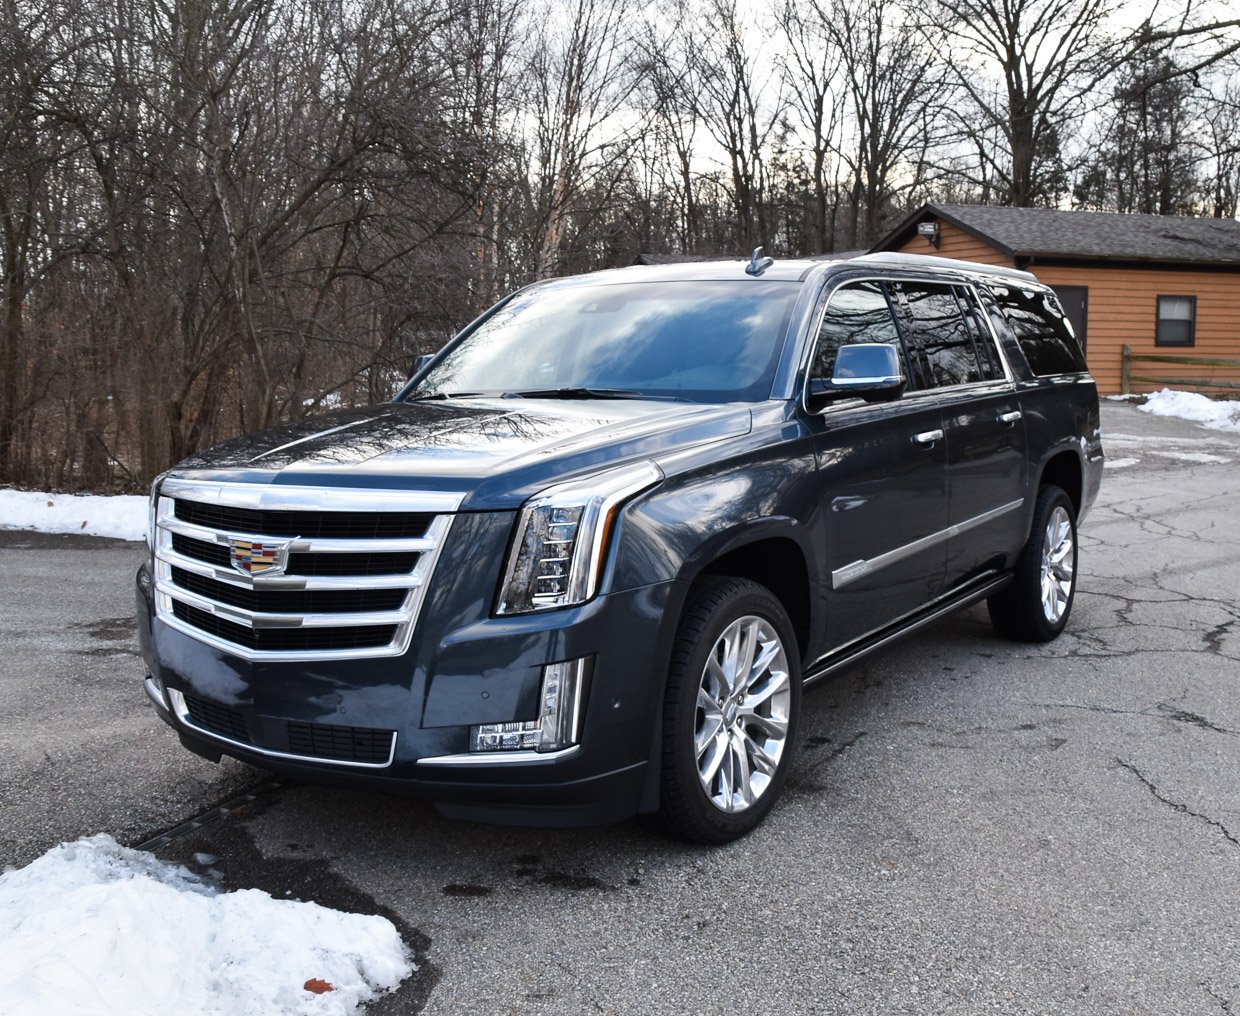 2019 Cadillac Escalade Review: For Fat Cats with Deep Pockets